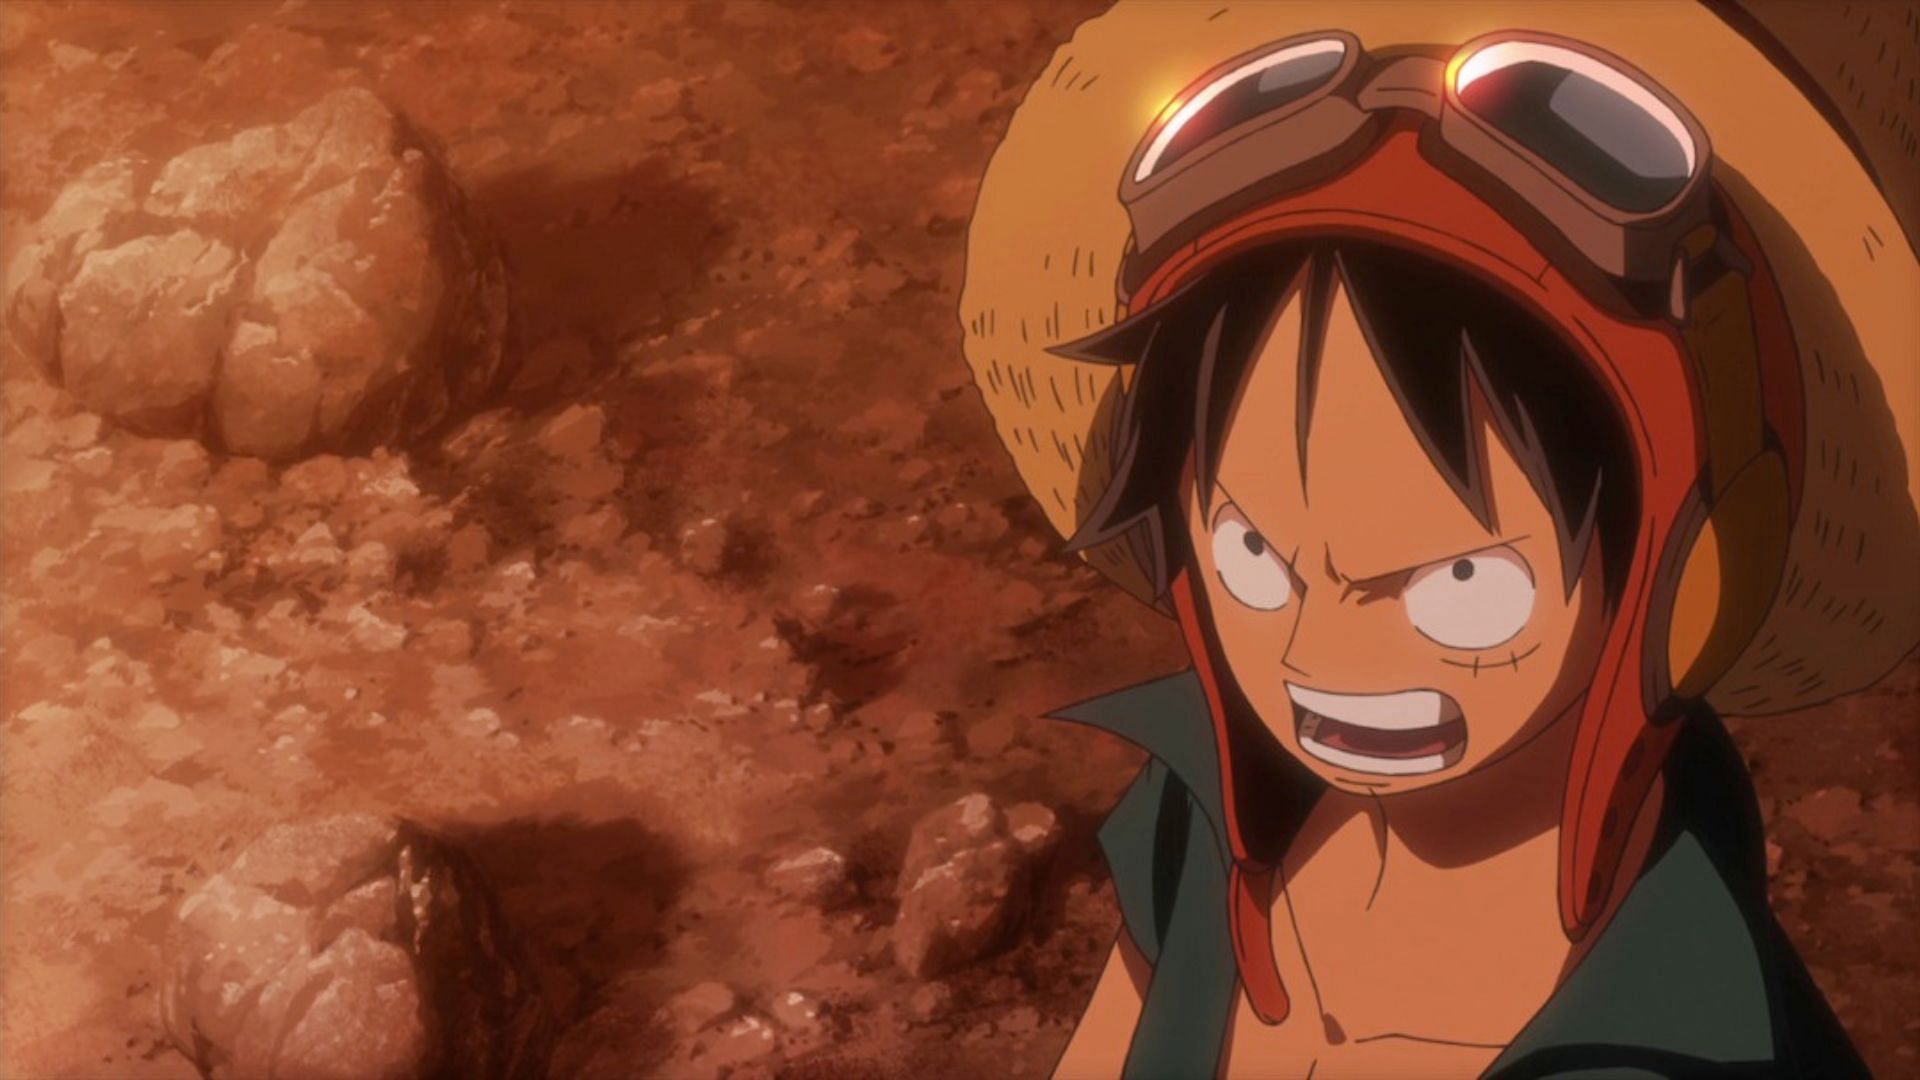 Monkey D. Luffy as shown in the series (Image via Toei Animation)